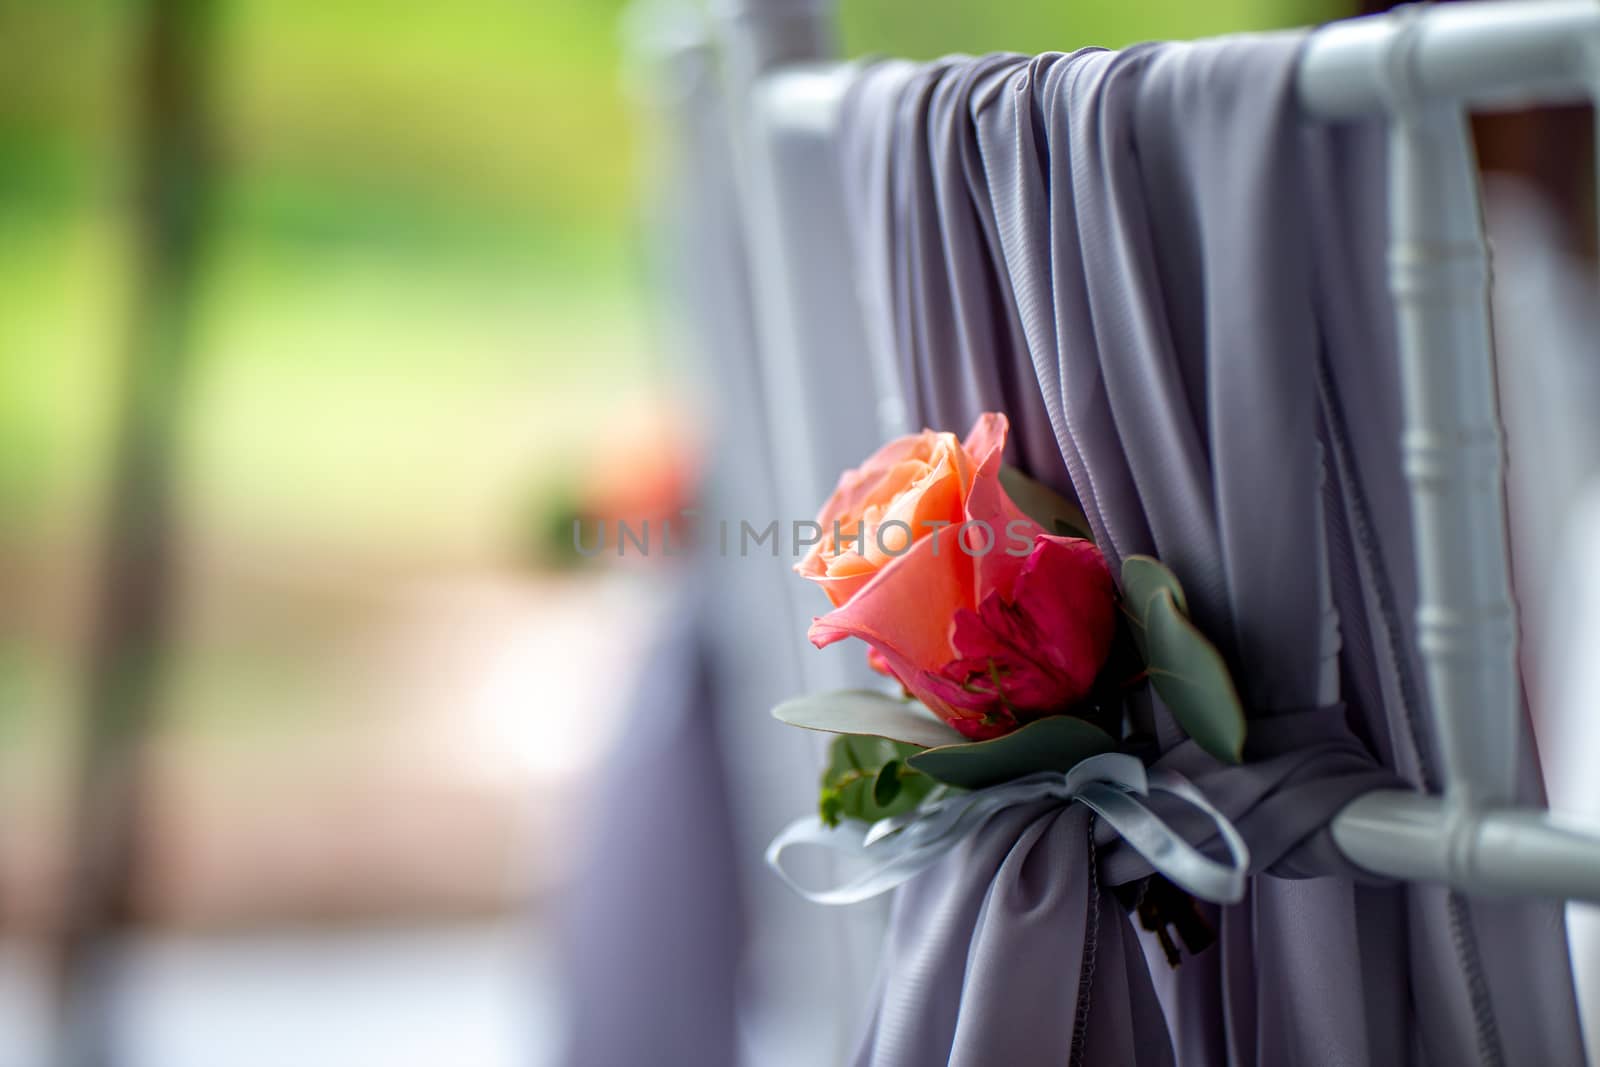 Decorated wedding chair with pink rose. Pink rose tied on back of chair in wedding party.